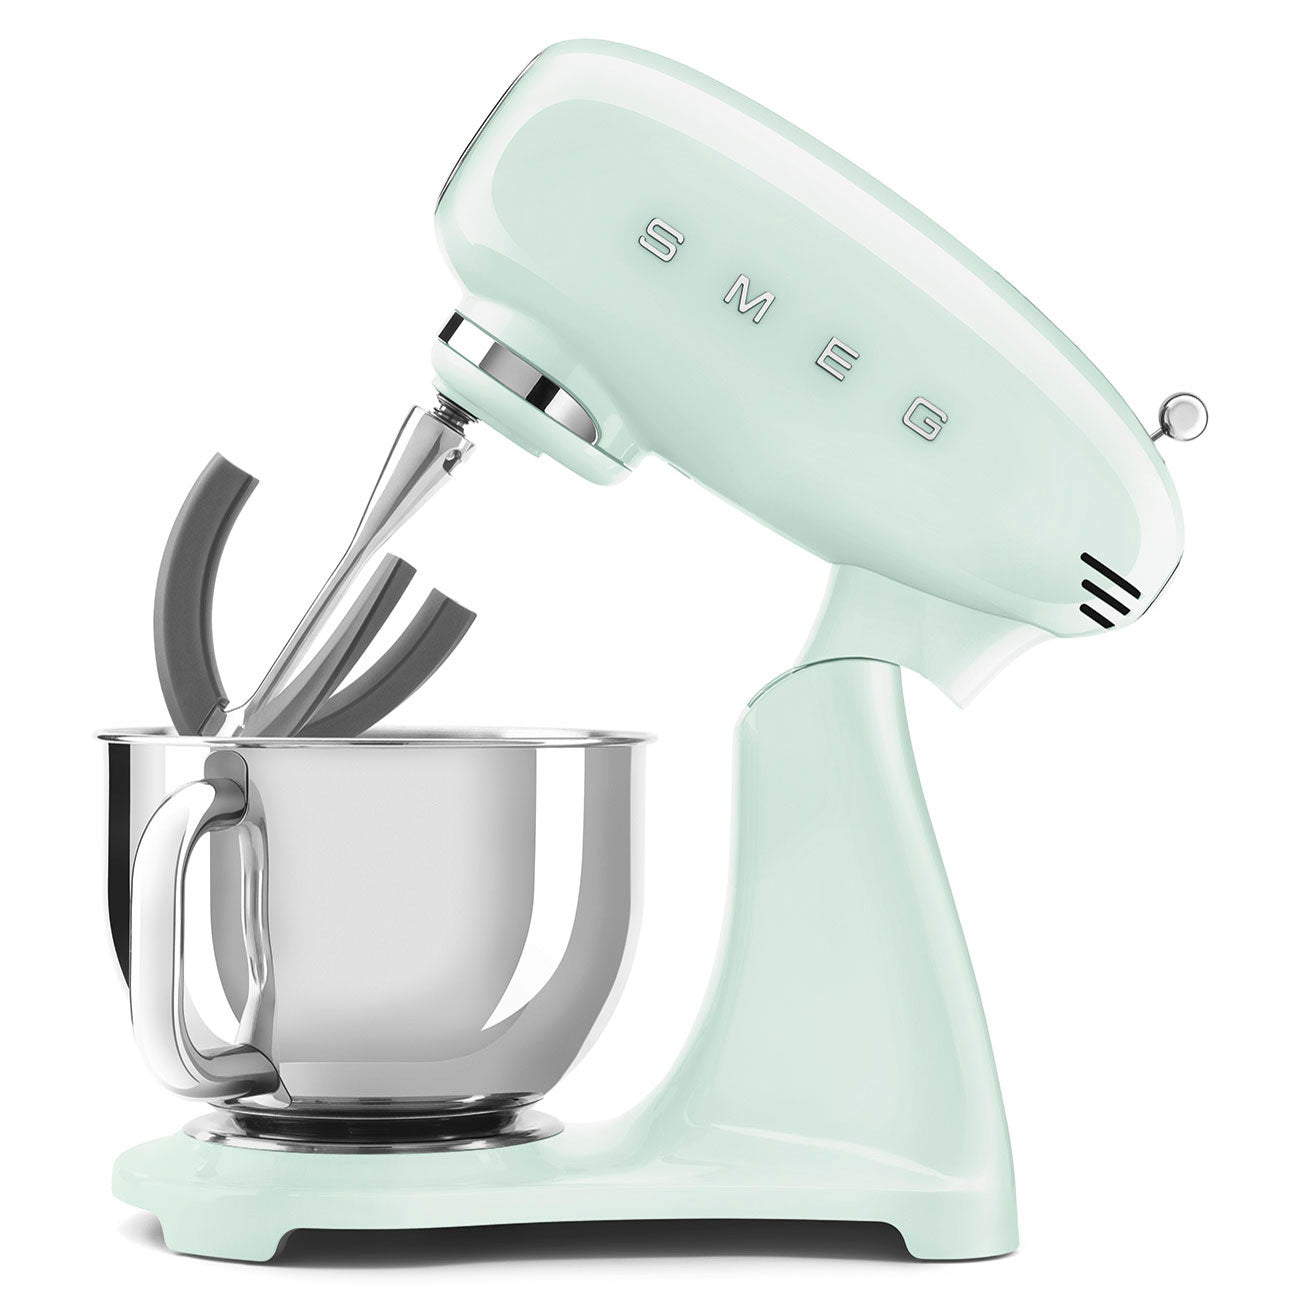 Smeg 50's Style 4.8L Stand Mixer Full Color Pastel Green SMF03PGSA